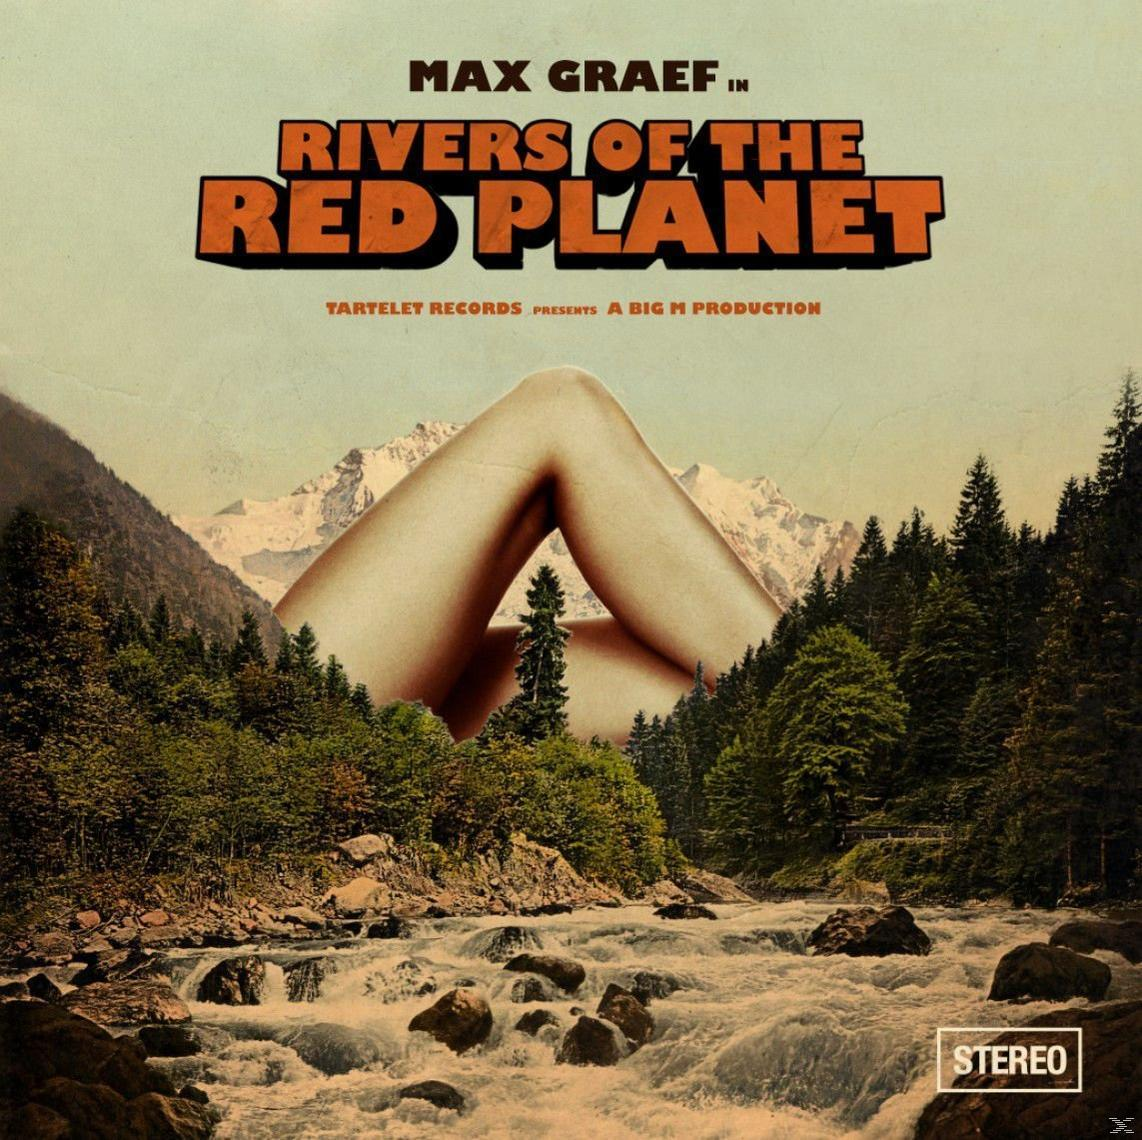 Max Graef - Rivers Of (Vinyl) The - (2lp) Planet Red